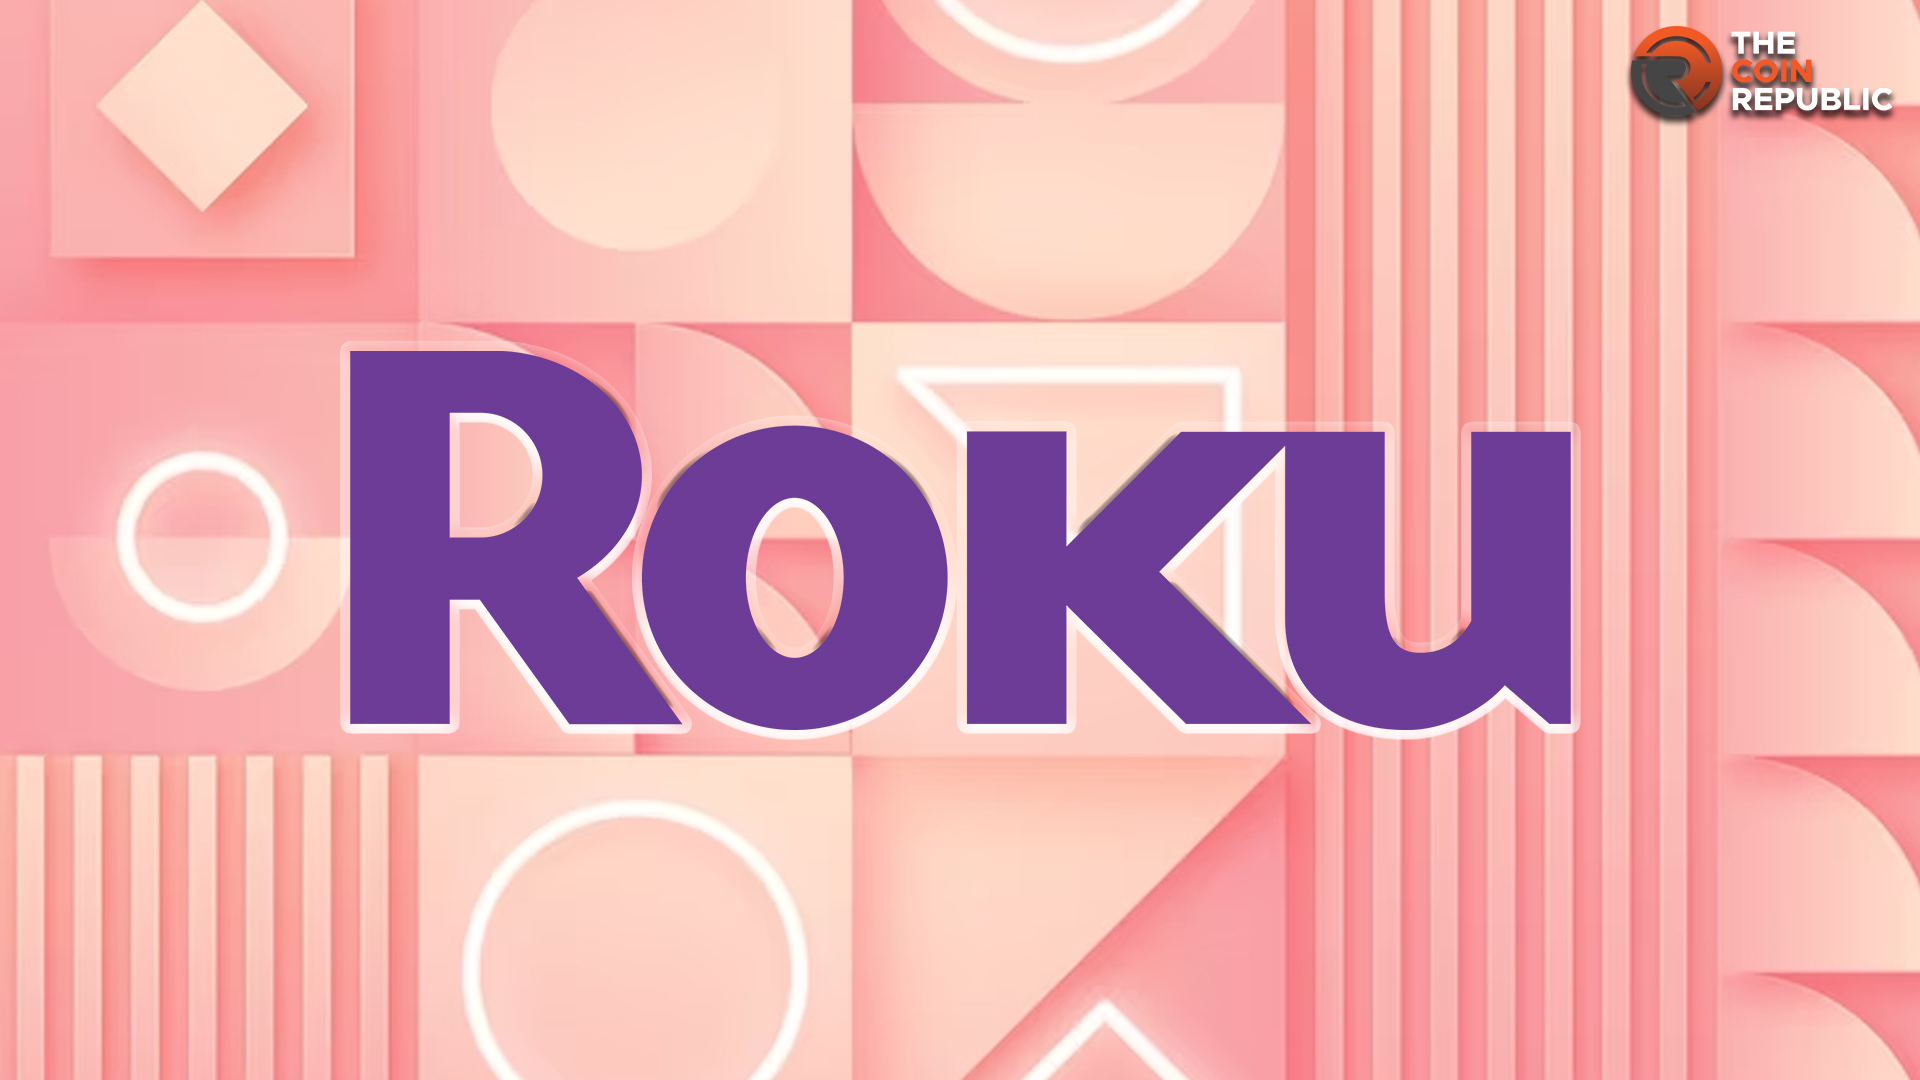 ROKU Stock: Is ROKU Stock Getting Ready for 52-Week High?